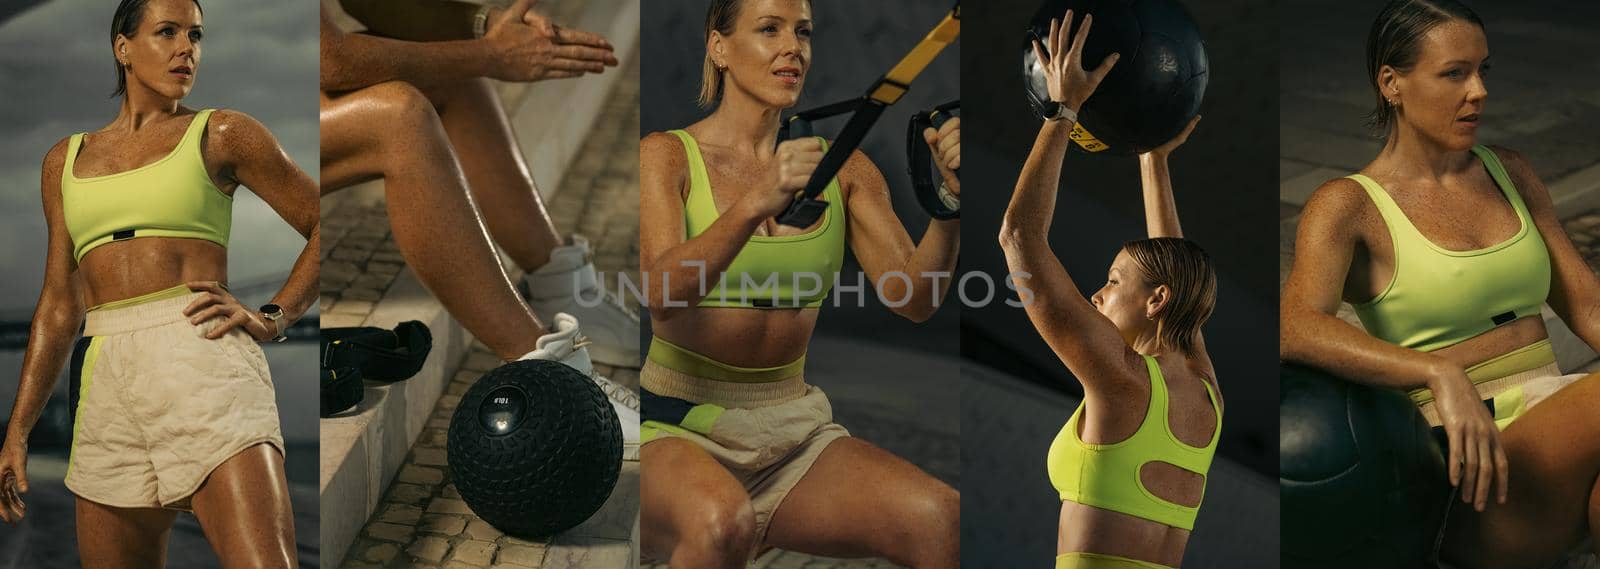 Collage with woman in fitness wear doing workout with a heavy medicine ball and trx straps outdoors. Sporty girl with fit body in sportswear with equipment